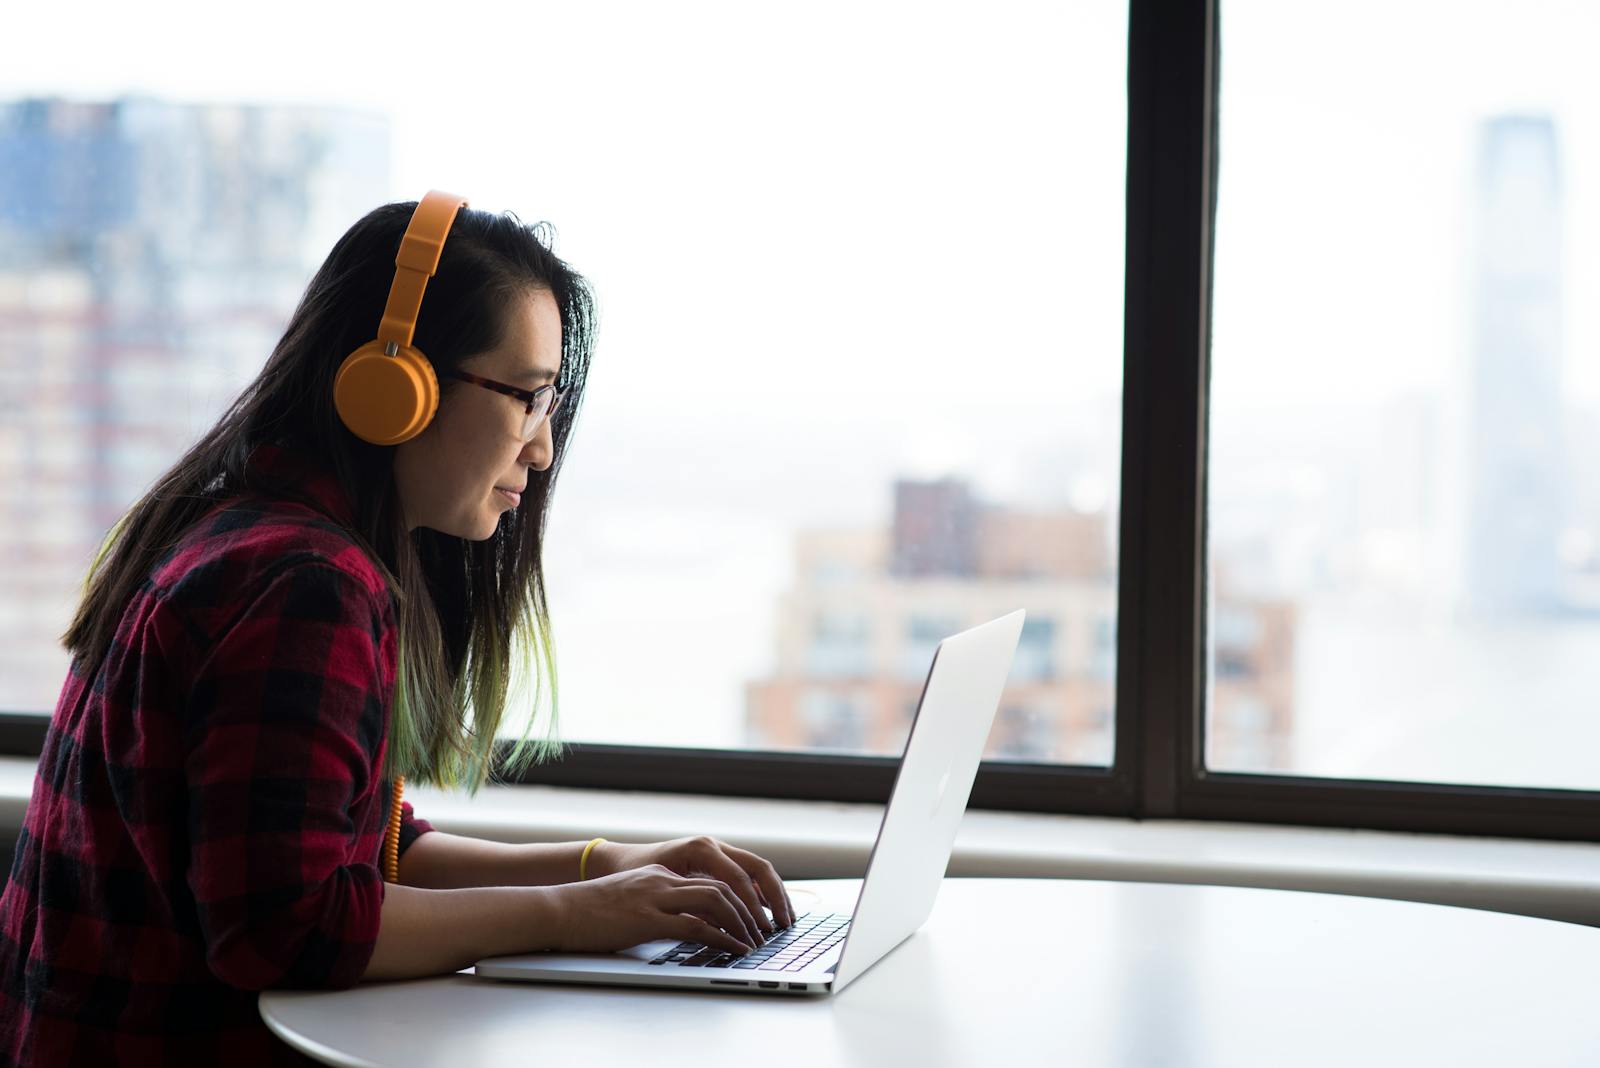 Photography of Woman Using Laptop and Wearing a Noise Cancelling Headphone